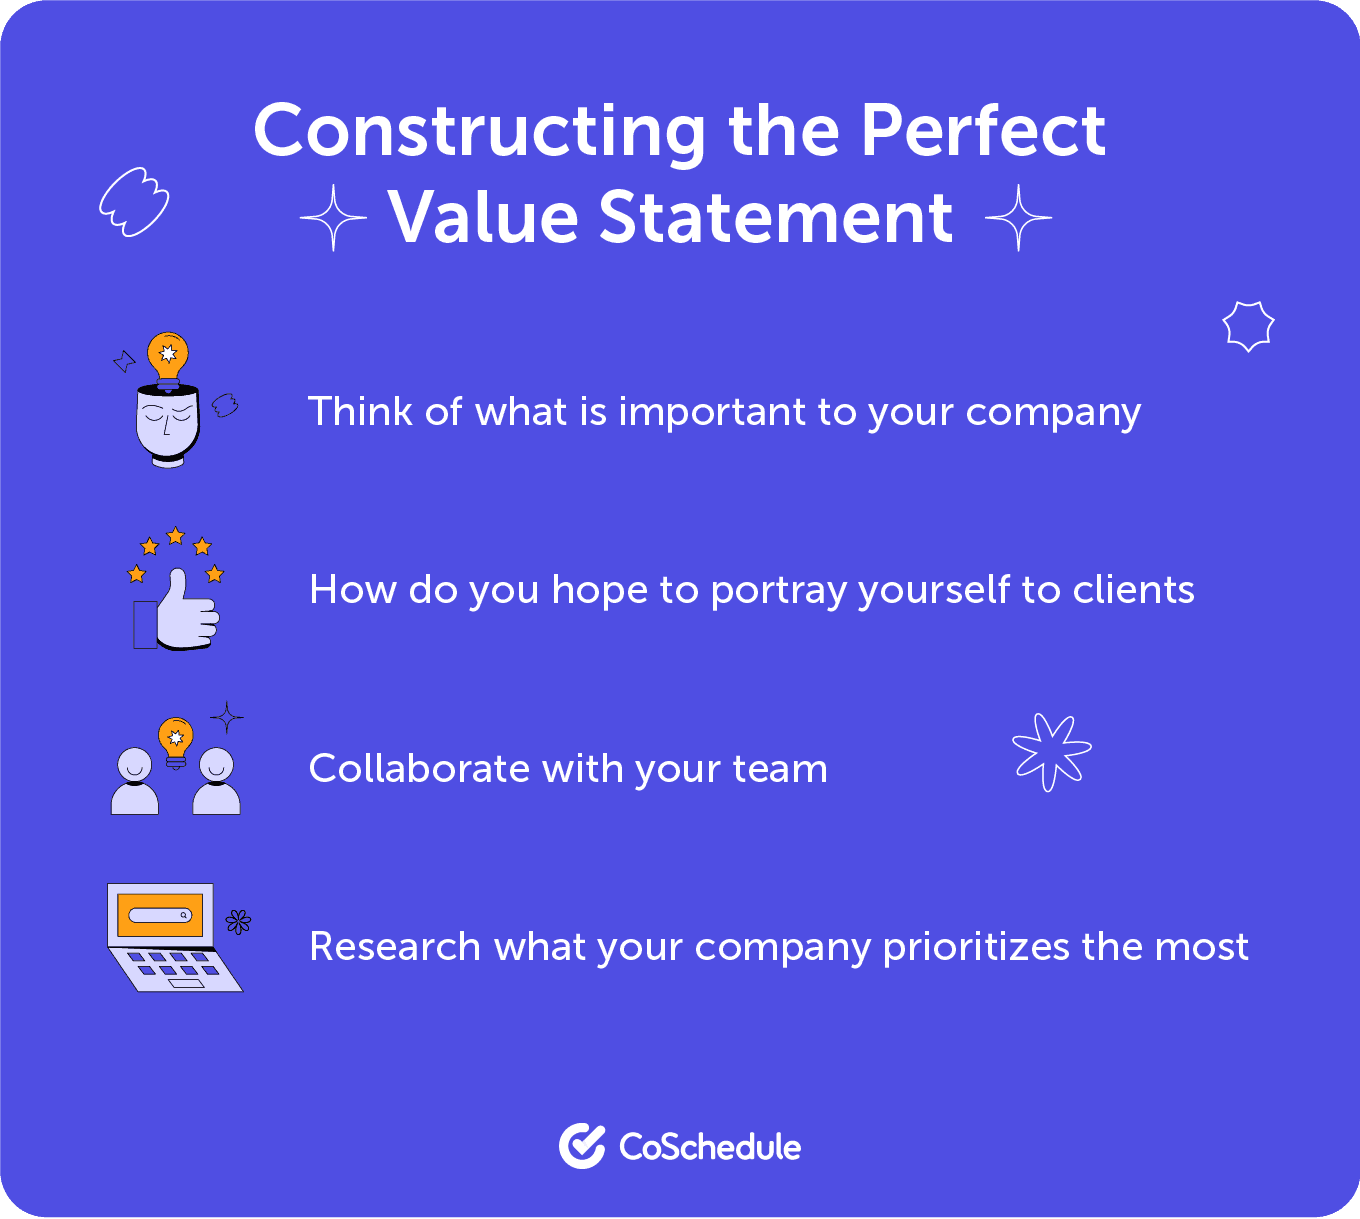 CoSchedules four ways on how to construct the perfect value statement.